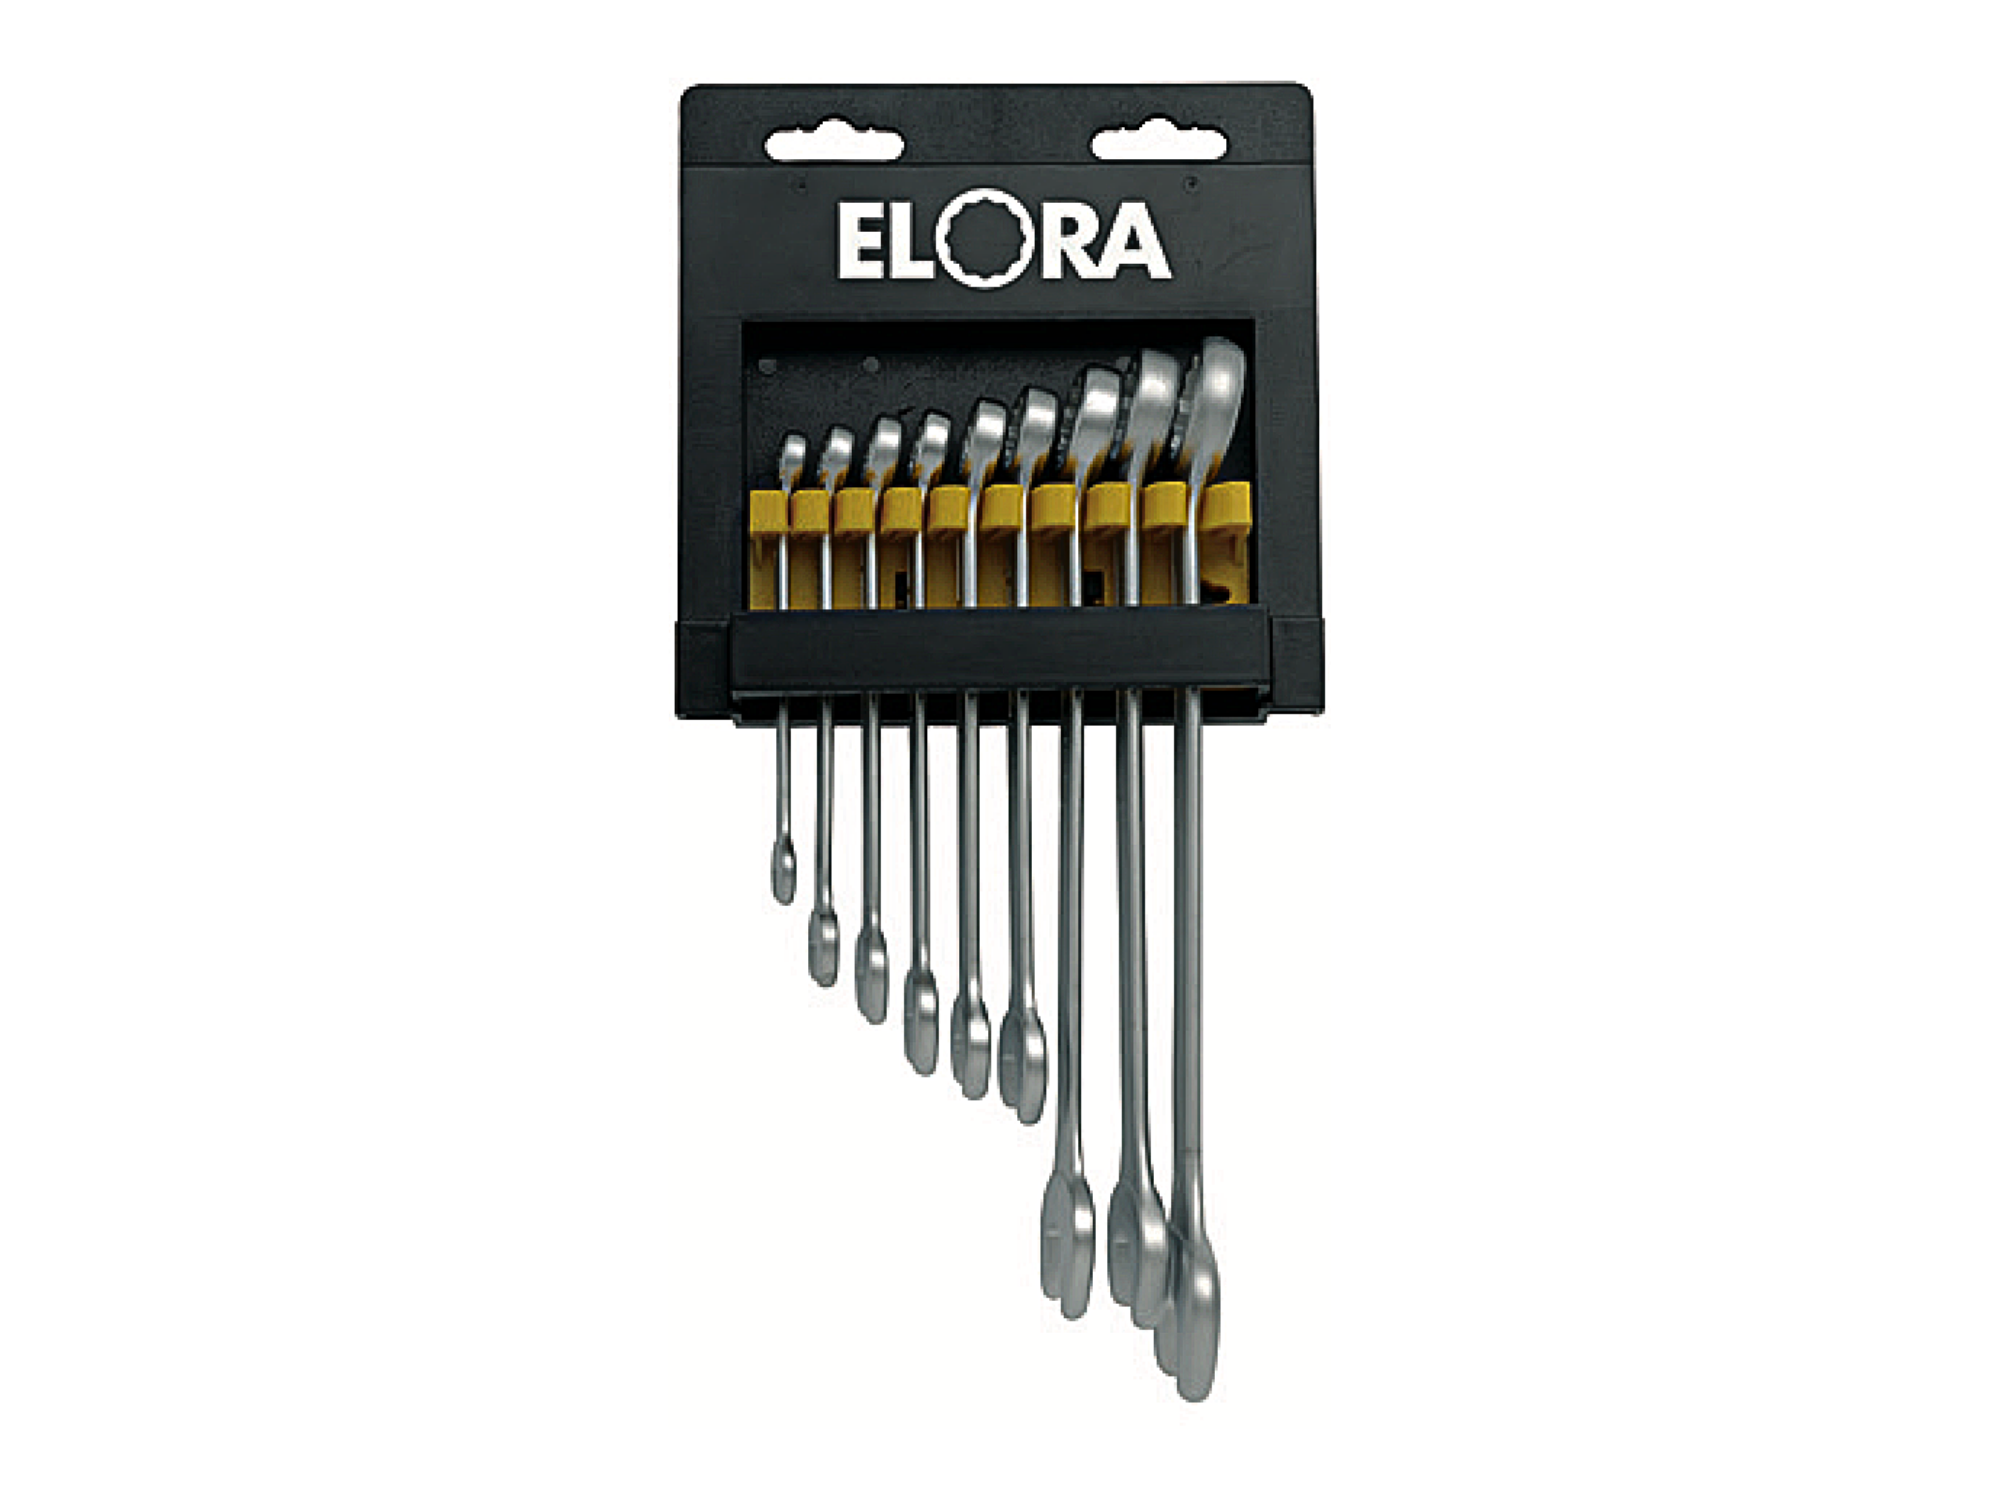 ELORA 203-KH9 Combination Spanners Set (ELORA Tools) - Premium Combination Spanners Set from ELORA - Shop now at Yew Aik.